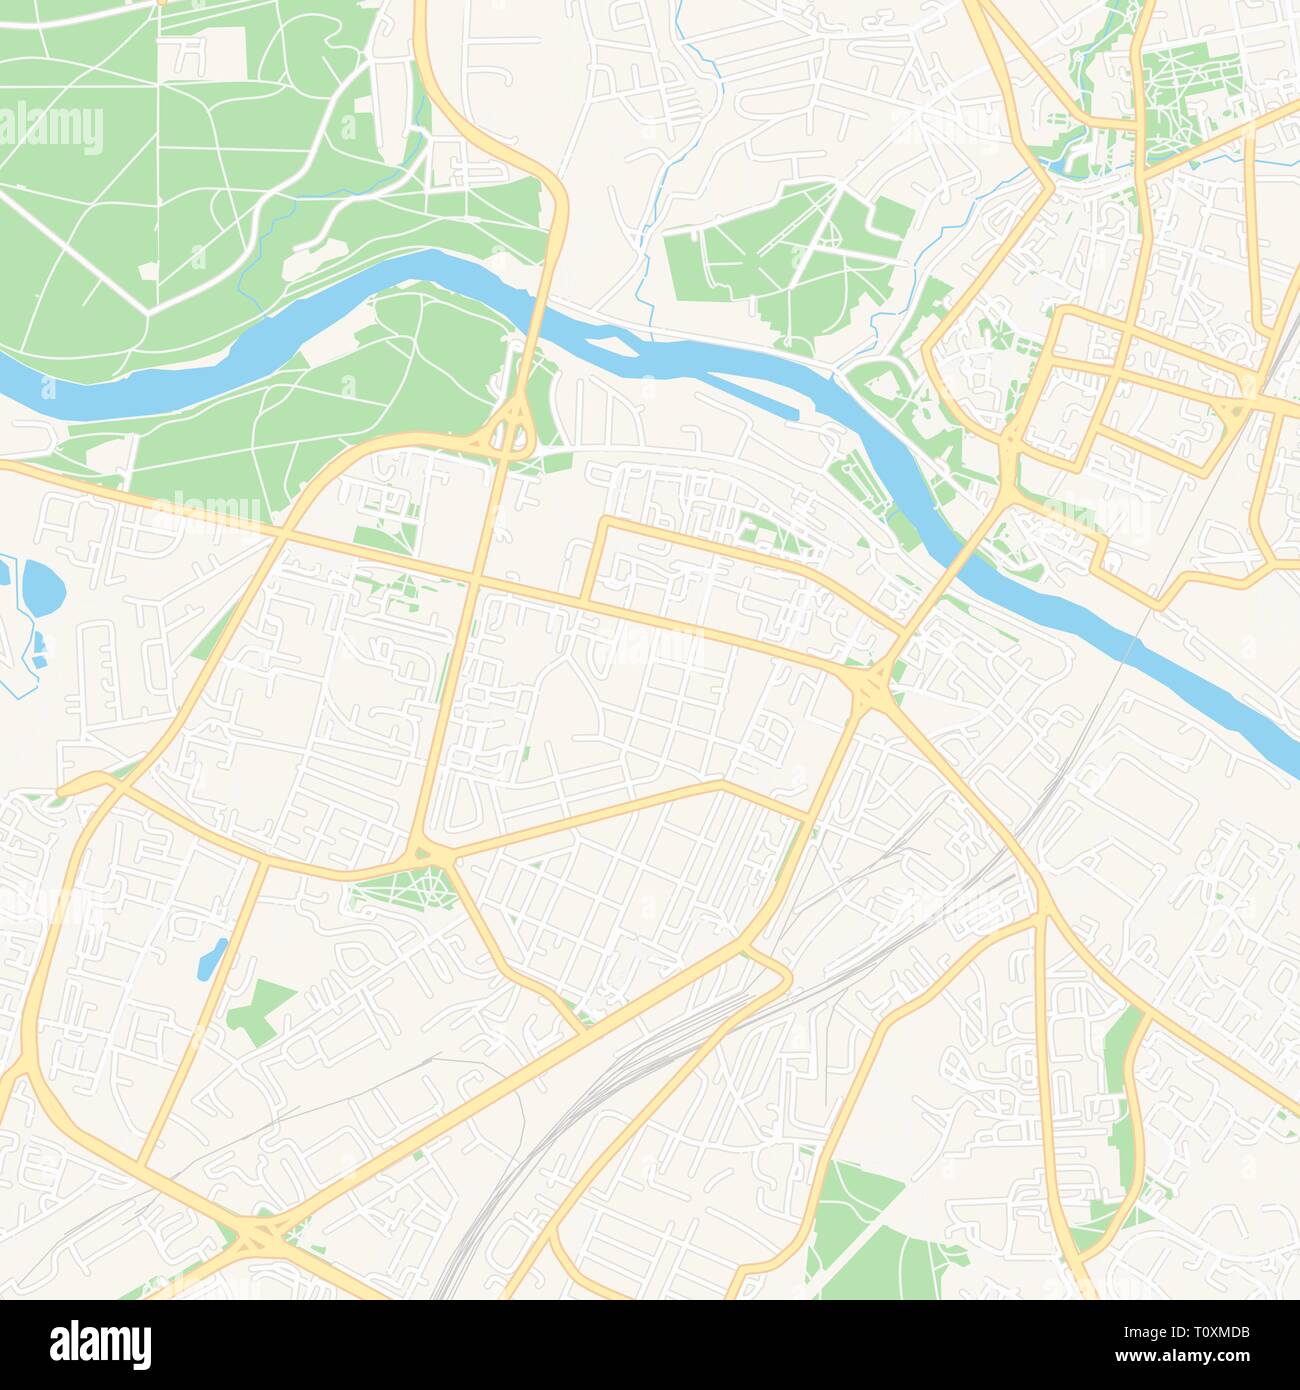 Printable map of Grodno, Belarus with main and secondary roads and larger railways. This map is carefully designed for routing and placing individual  Stock Vector